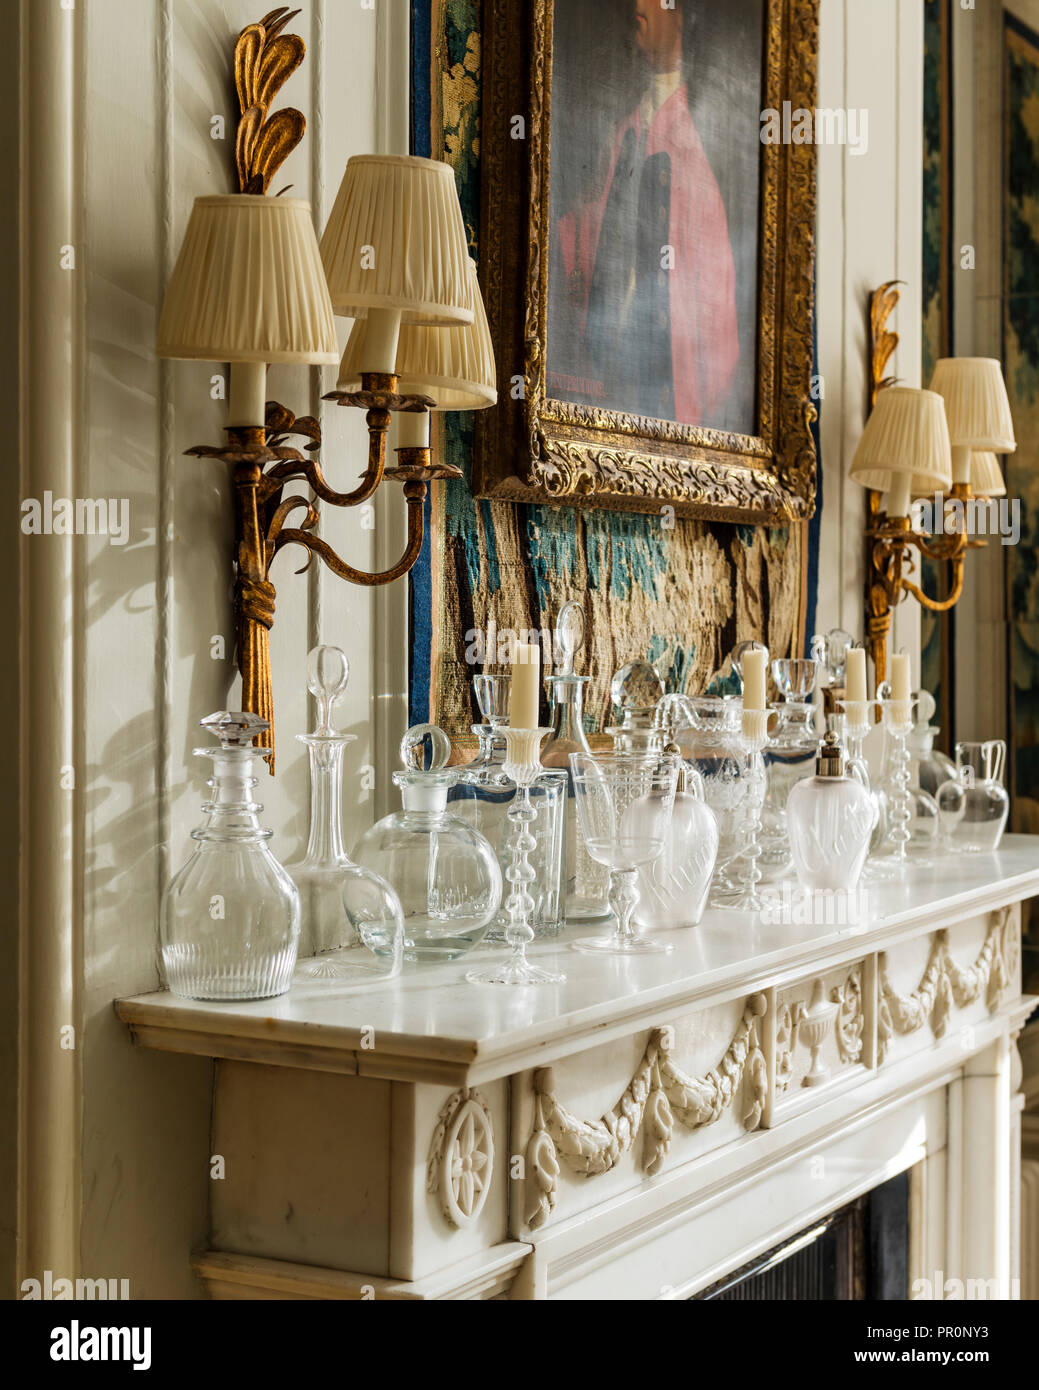 Gilt wall lighting with a collection of decanters on mantlepiece Stock Photo